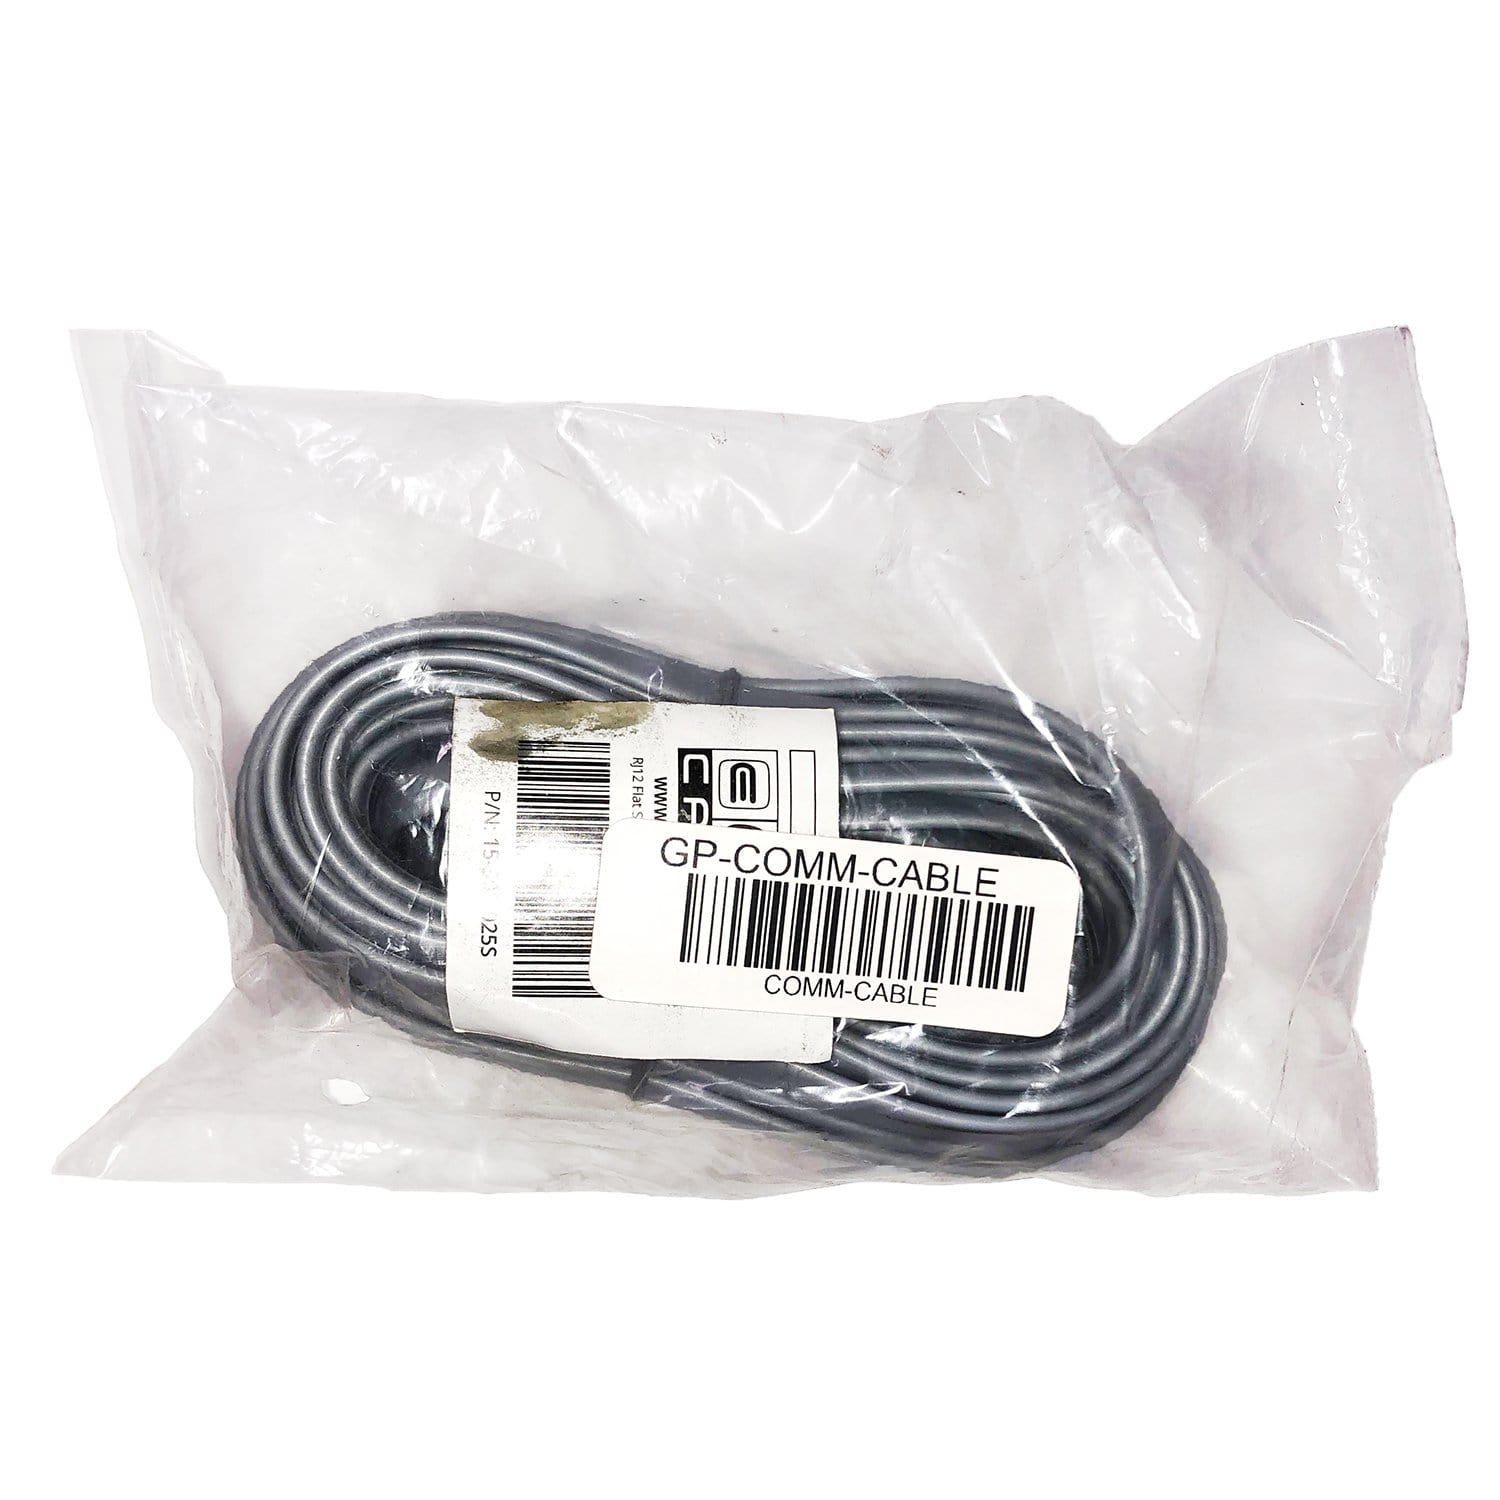 Go Power! GP-COMM-CABLE Cables for GP-PWM-30